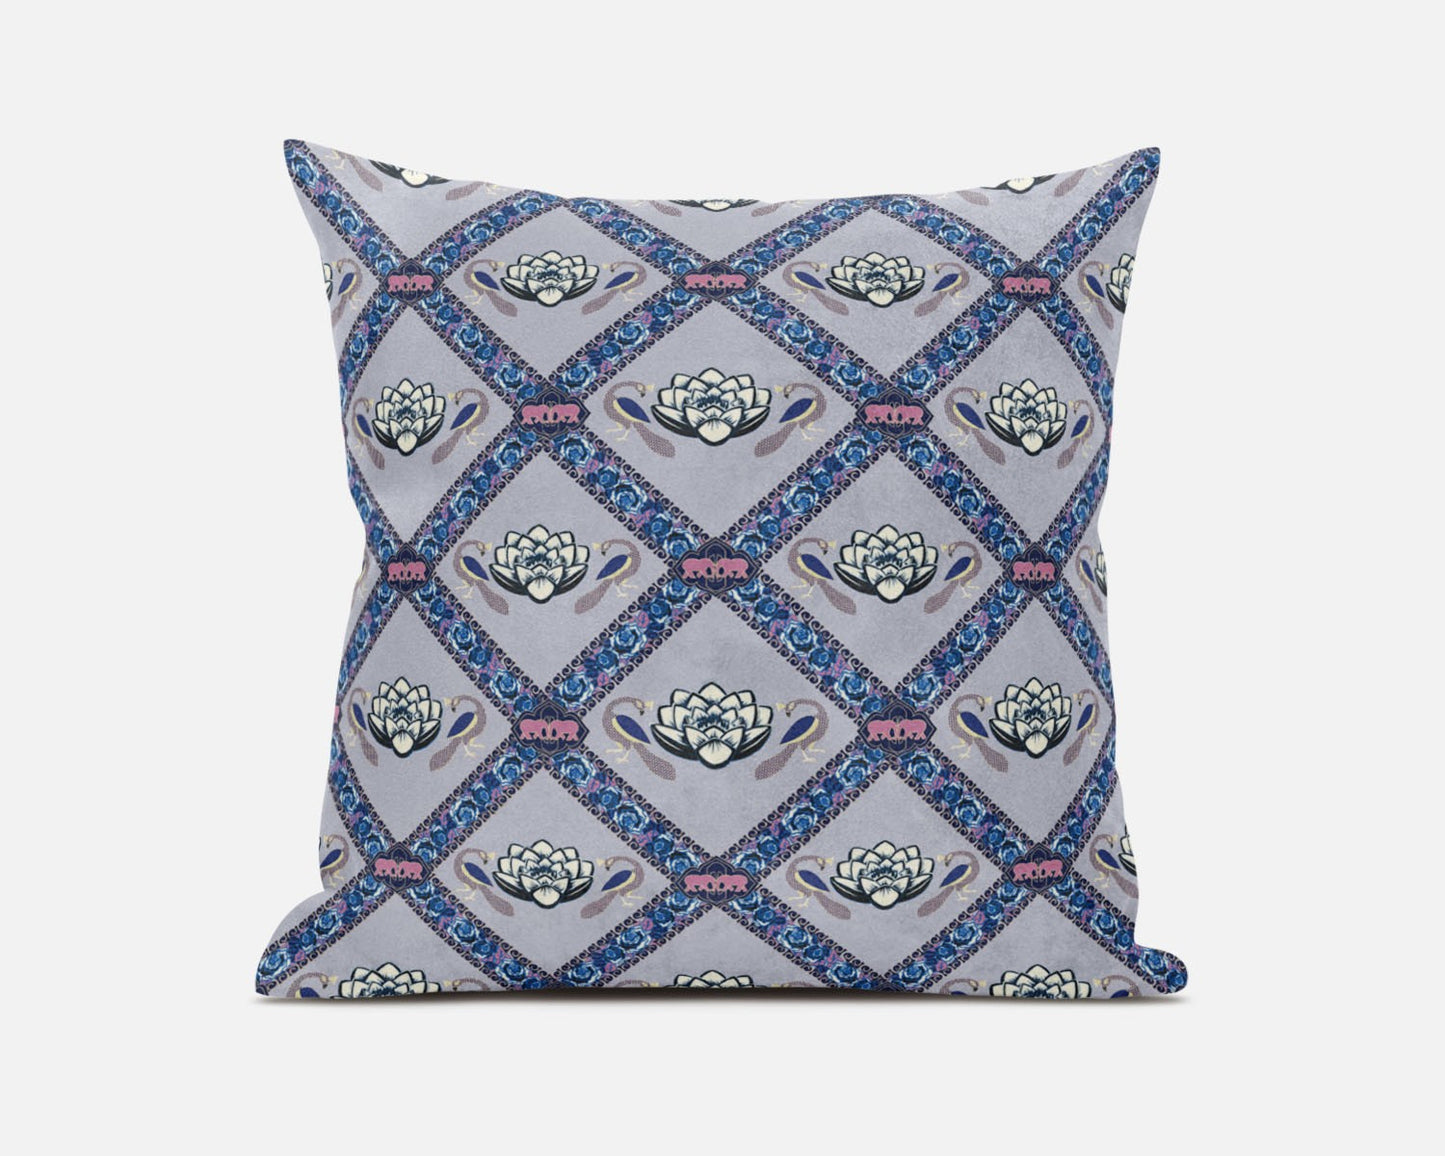 16" X 16" Gray Sea Blue Pink Lotus Floral Blown Seam Suede Throw Pillow